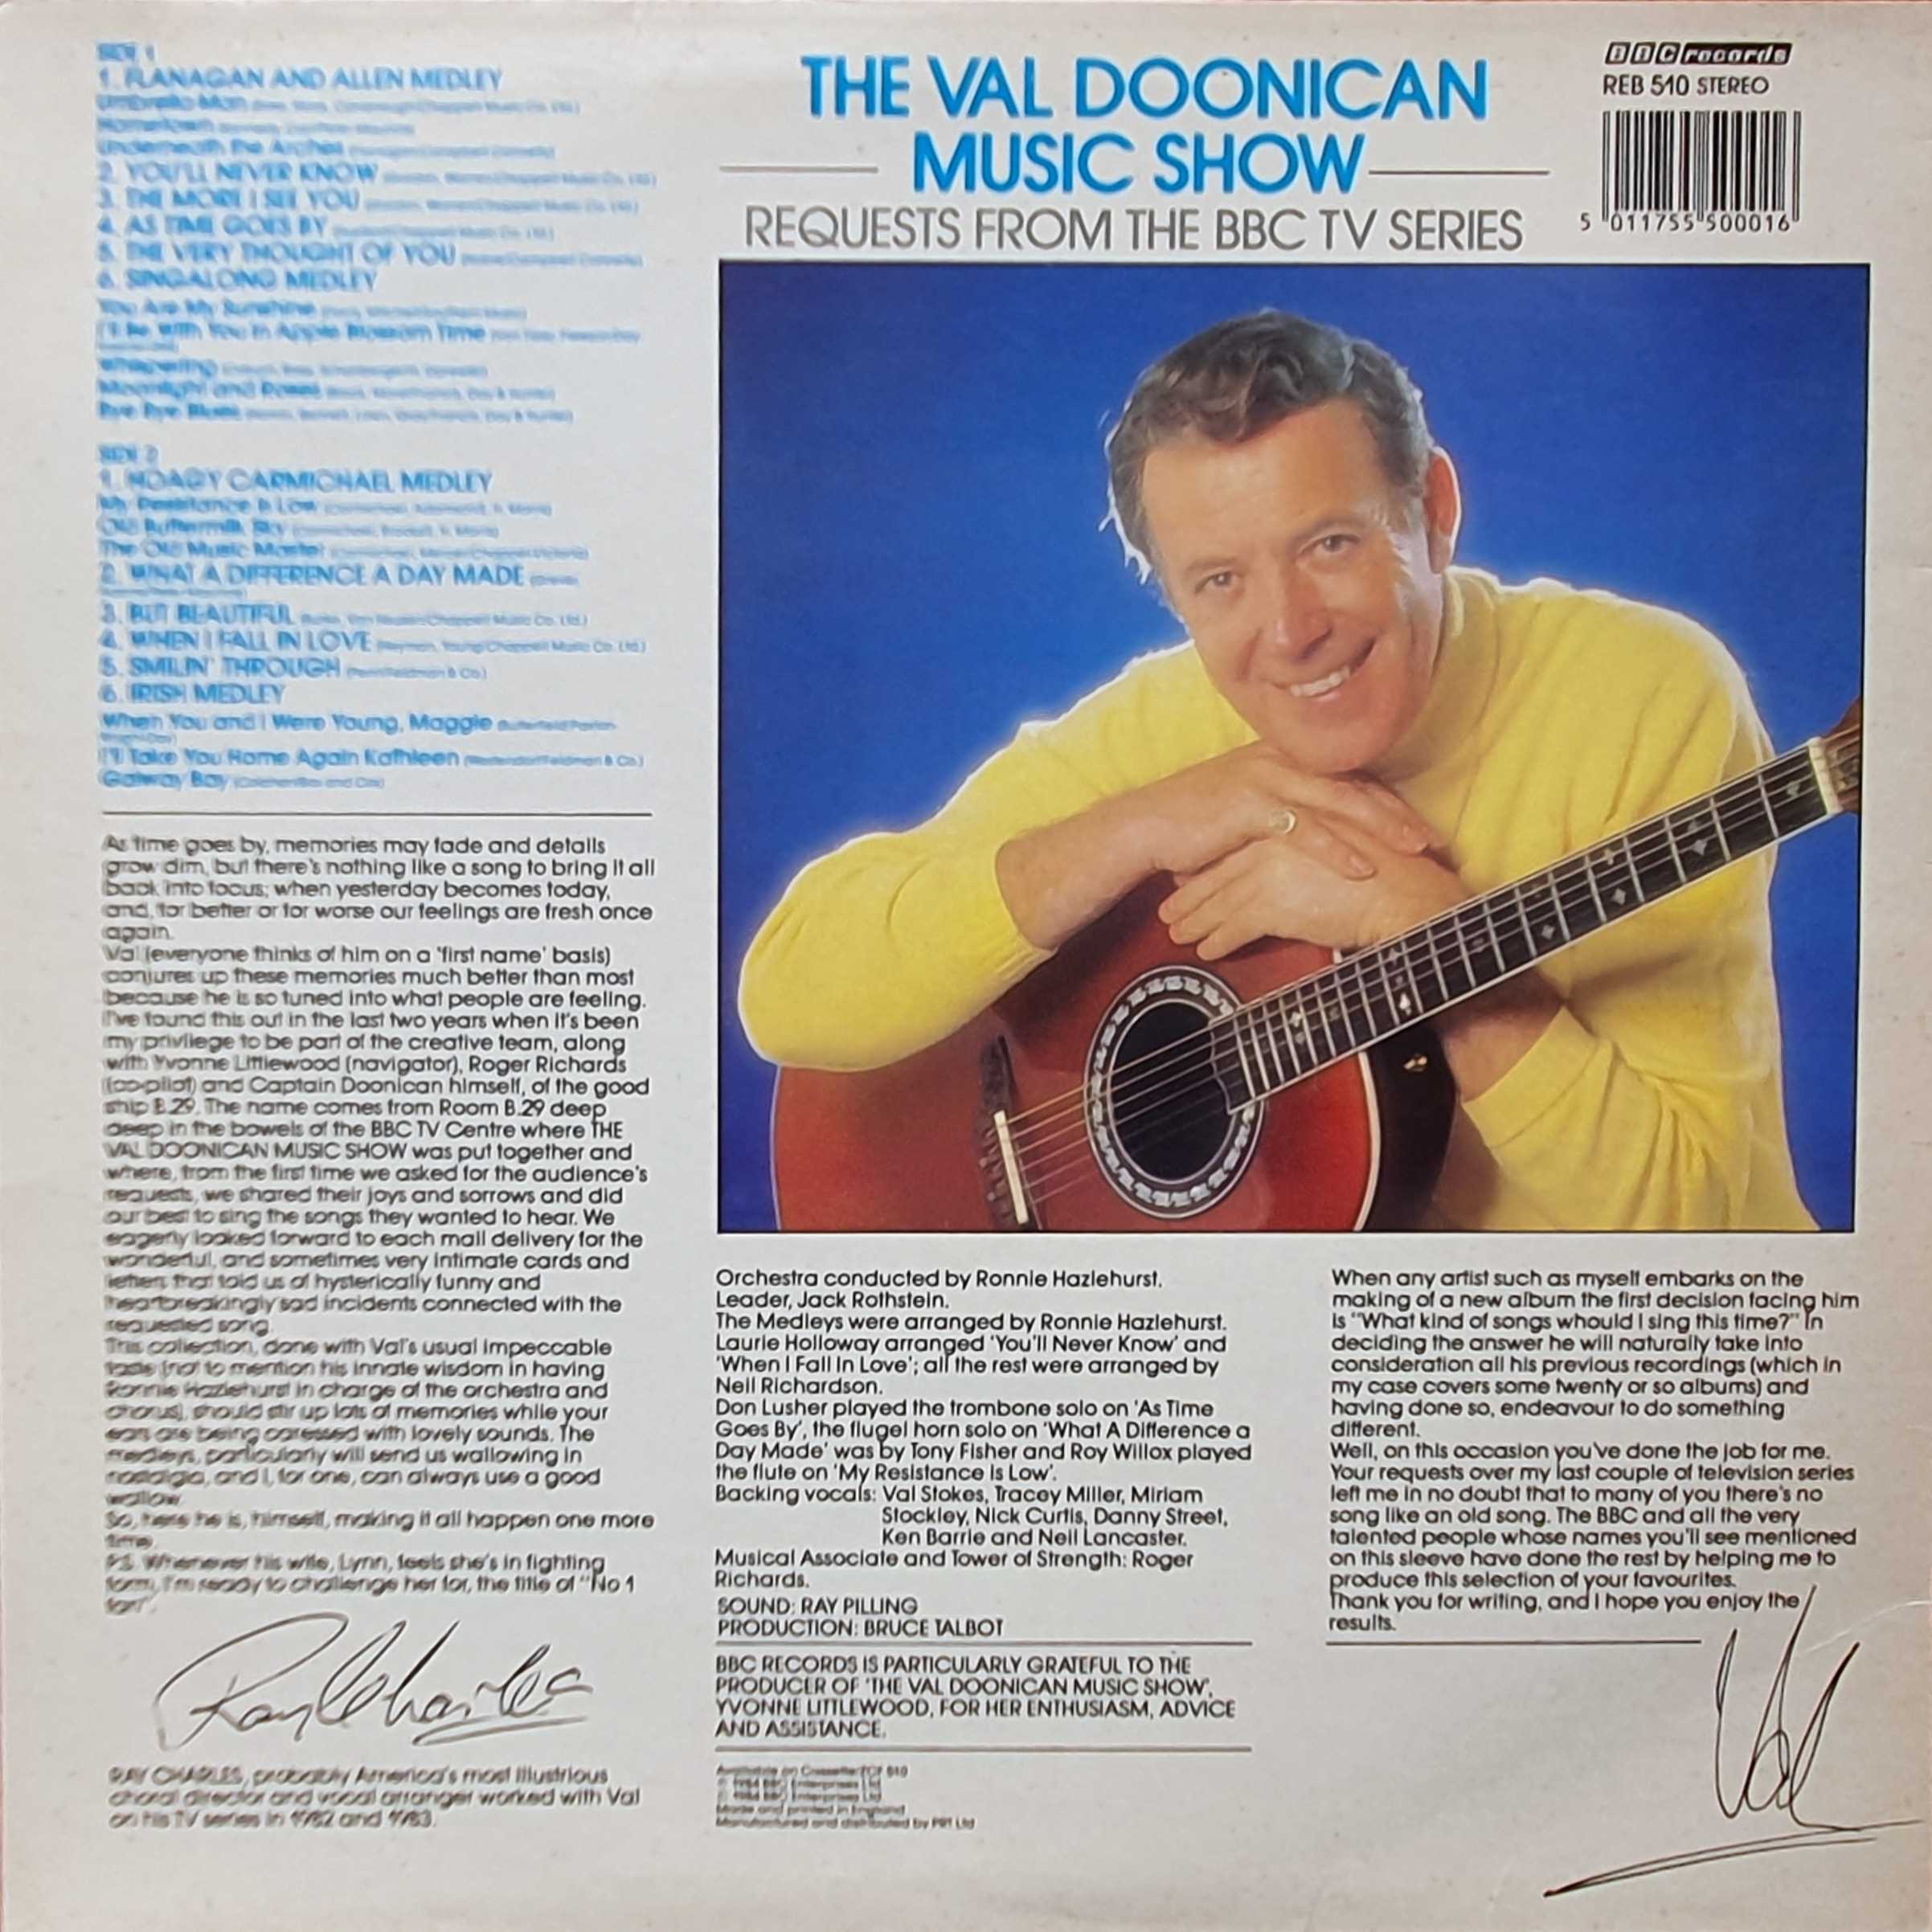 Picture of REB 510 The Val Doonican music show by artist Various from the BBC records and Tapes library